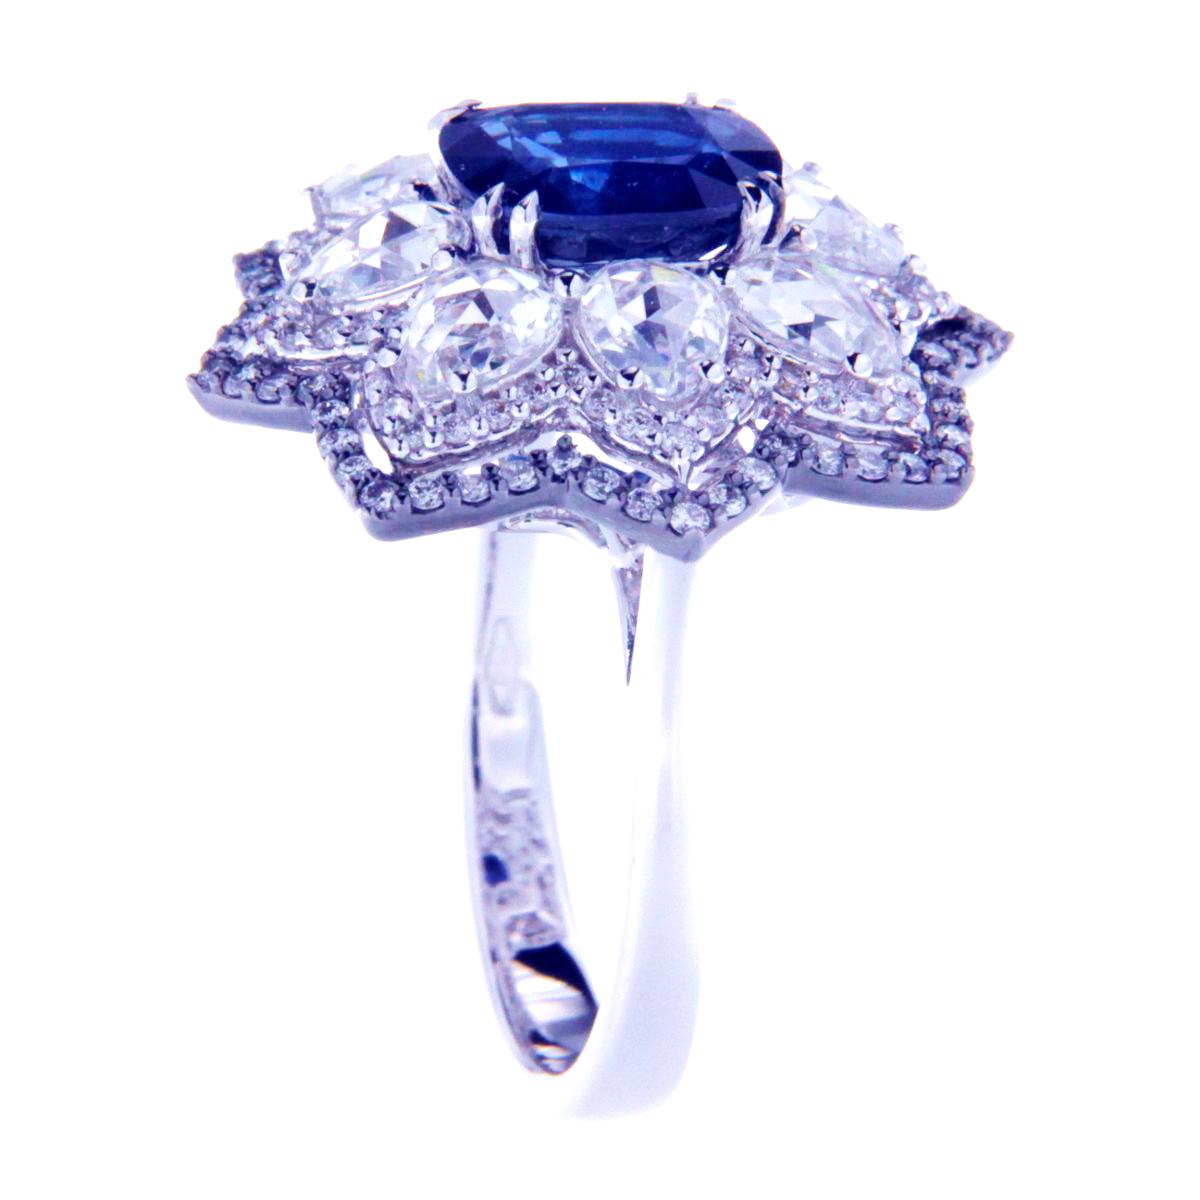 Beautiful ring consists of white gold with 2.58 Carats Cornflower Blue Cushion Cut Natural Sapphire. Surroundins the main stone are white gold bead set 2.04 Carats Natural Diamonds Round Brilliant Cut and Pear Rose Cut. Ring accompanied by a